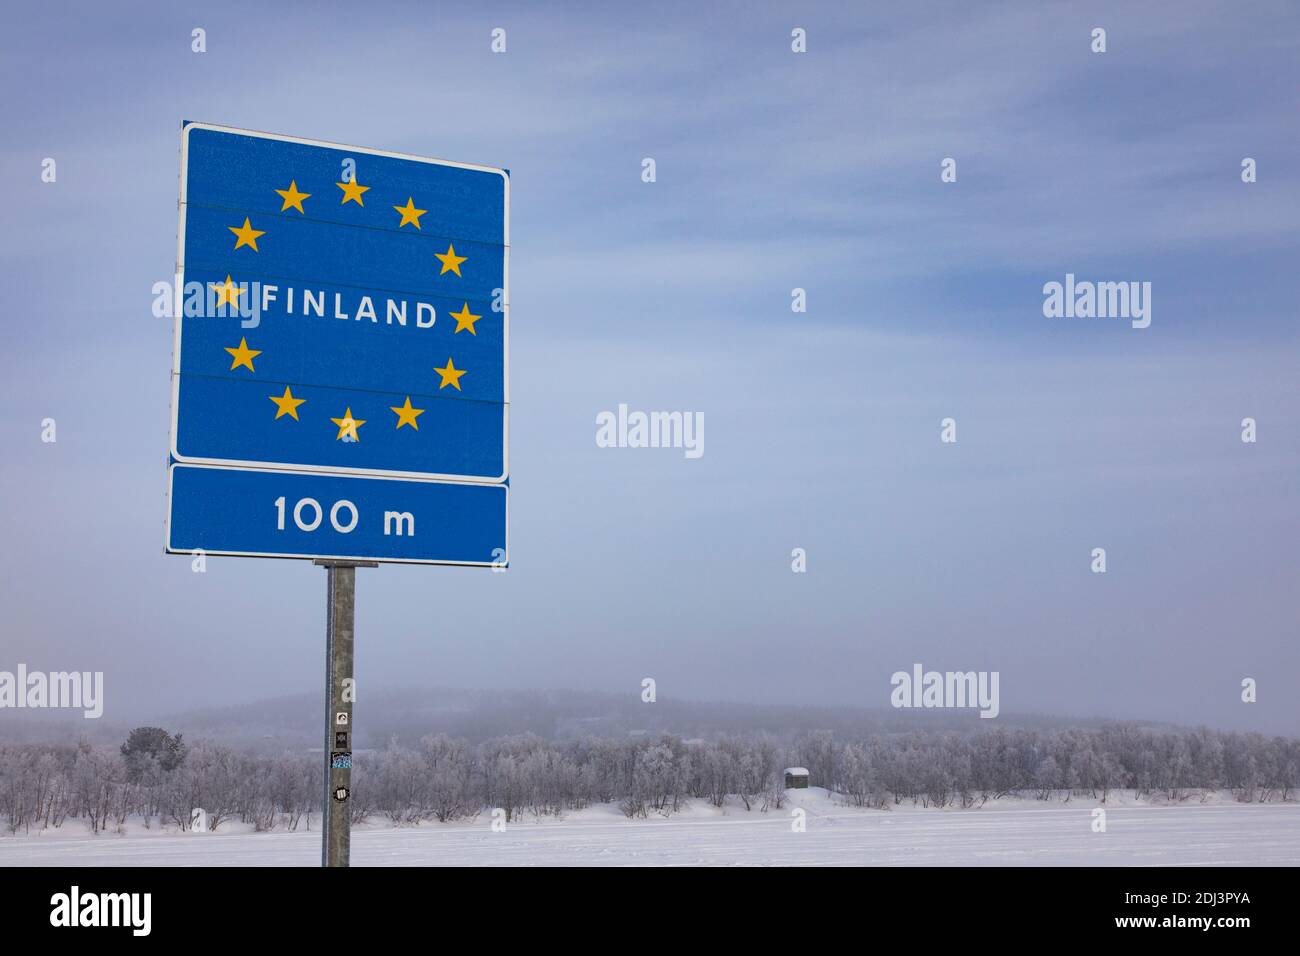 Lapland, Finland - March 4, 2020: border sign between Finland and Sweden. Stock Photo